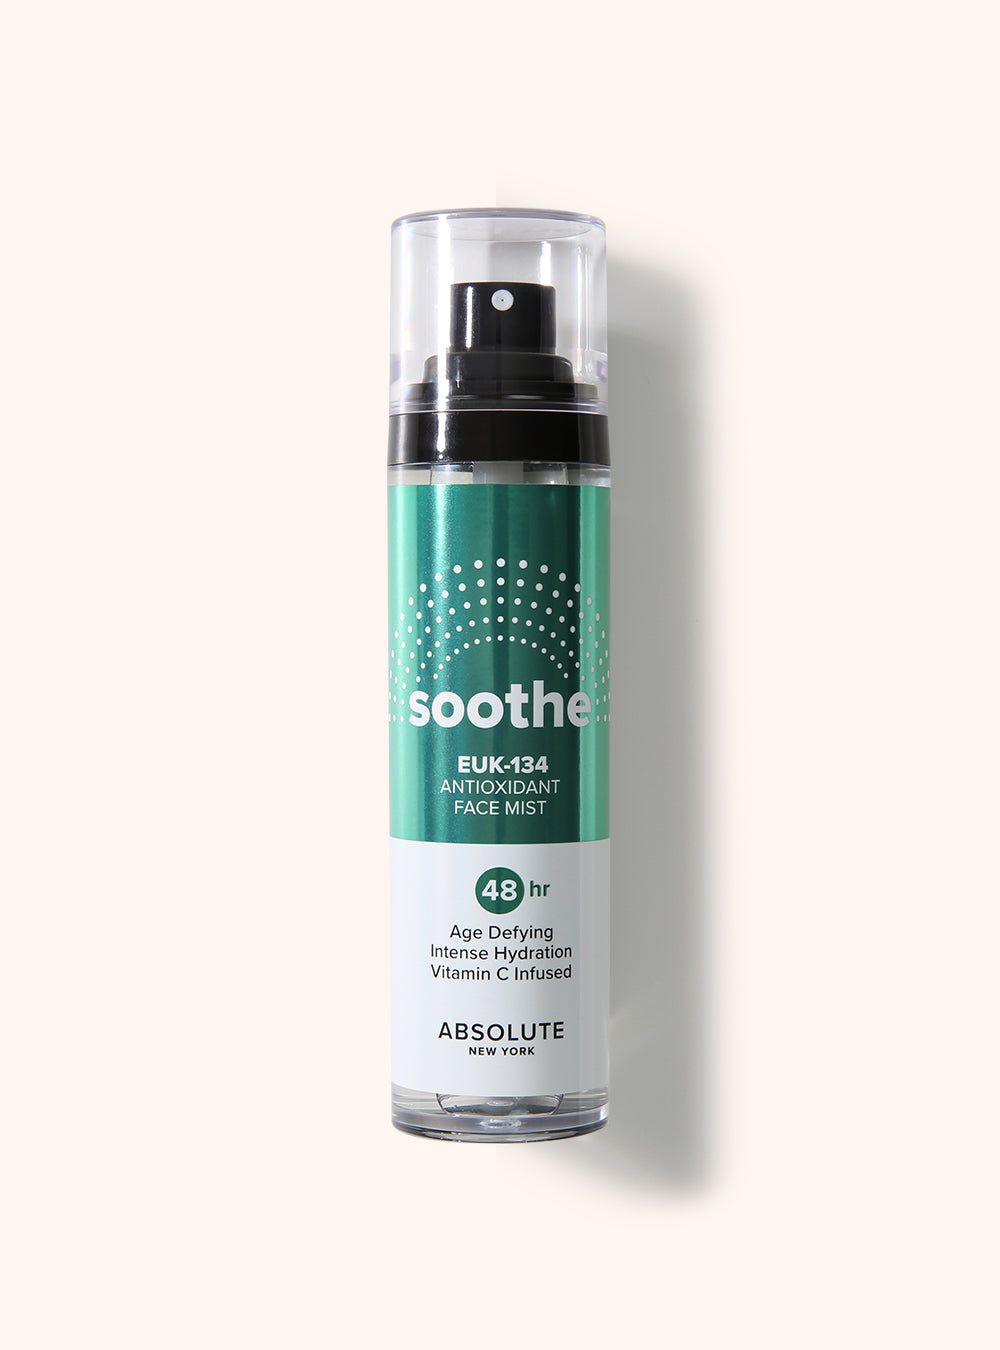 Soothing Antioxidant Face Mist